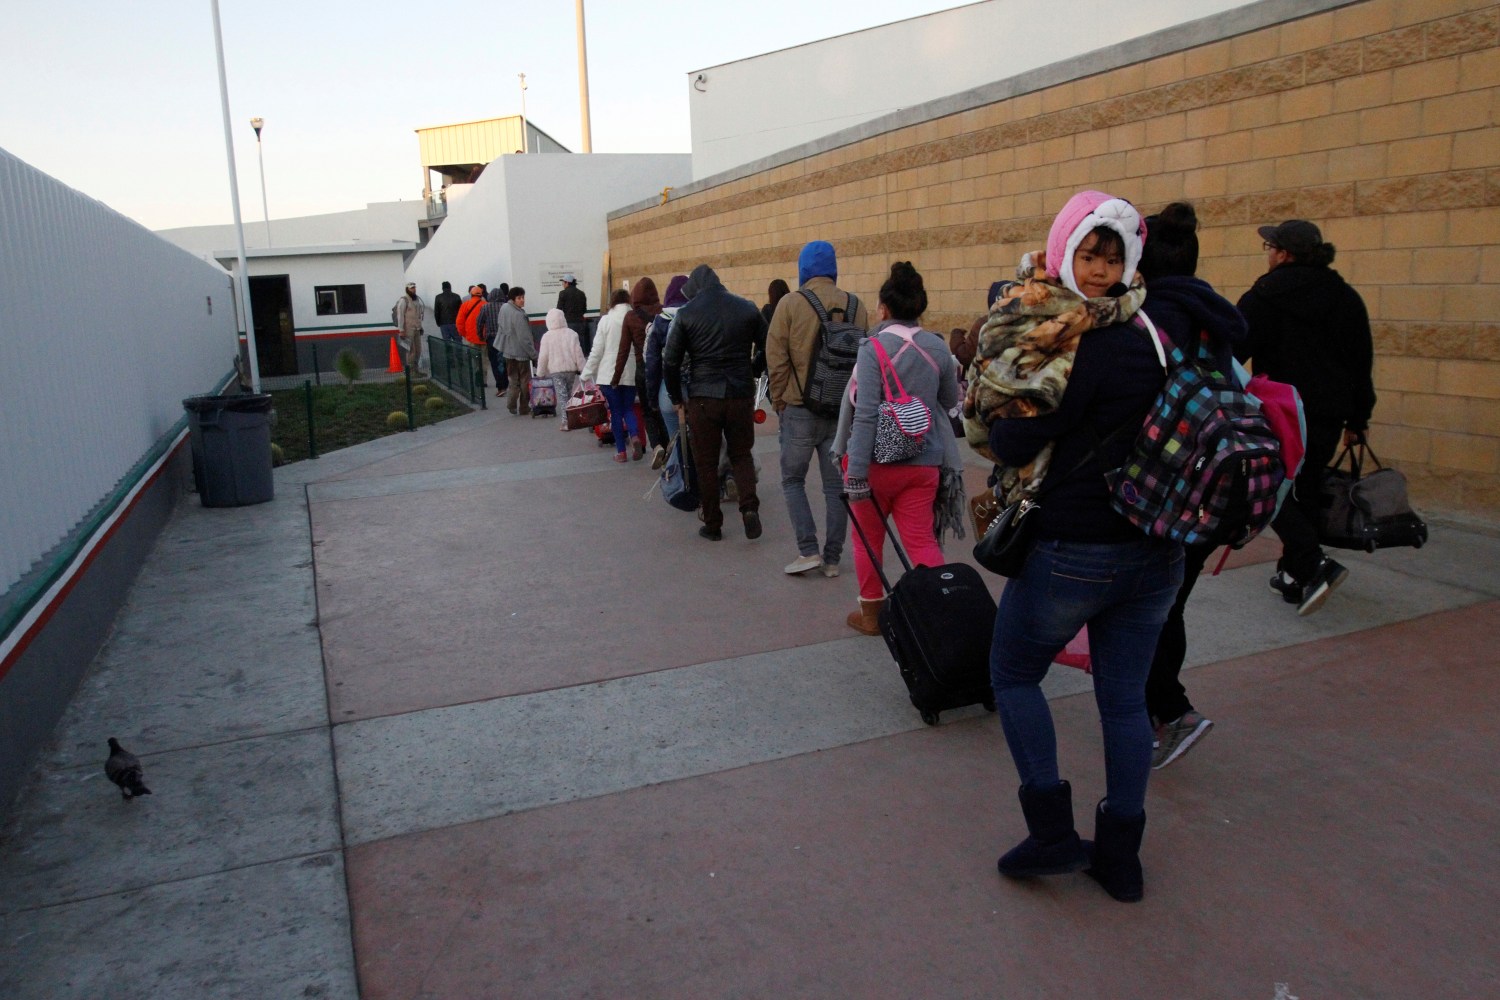 Immigrants from Central America and Mexican citizens queue to cross into the U.S. to apply for asylum at the new border crossing of El Chaparral in Tijuana